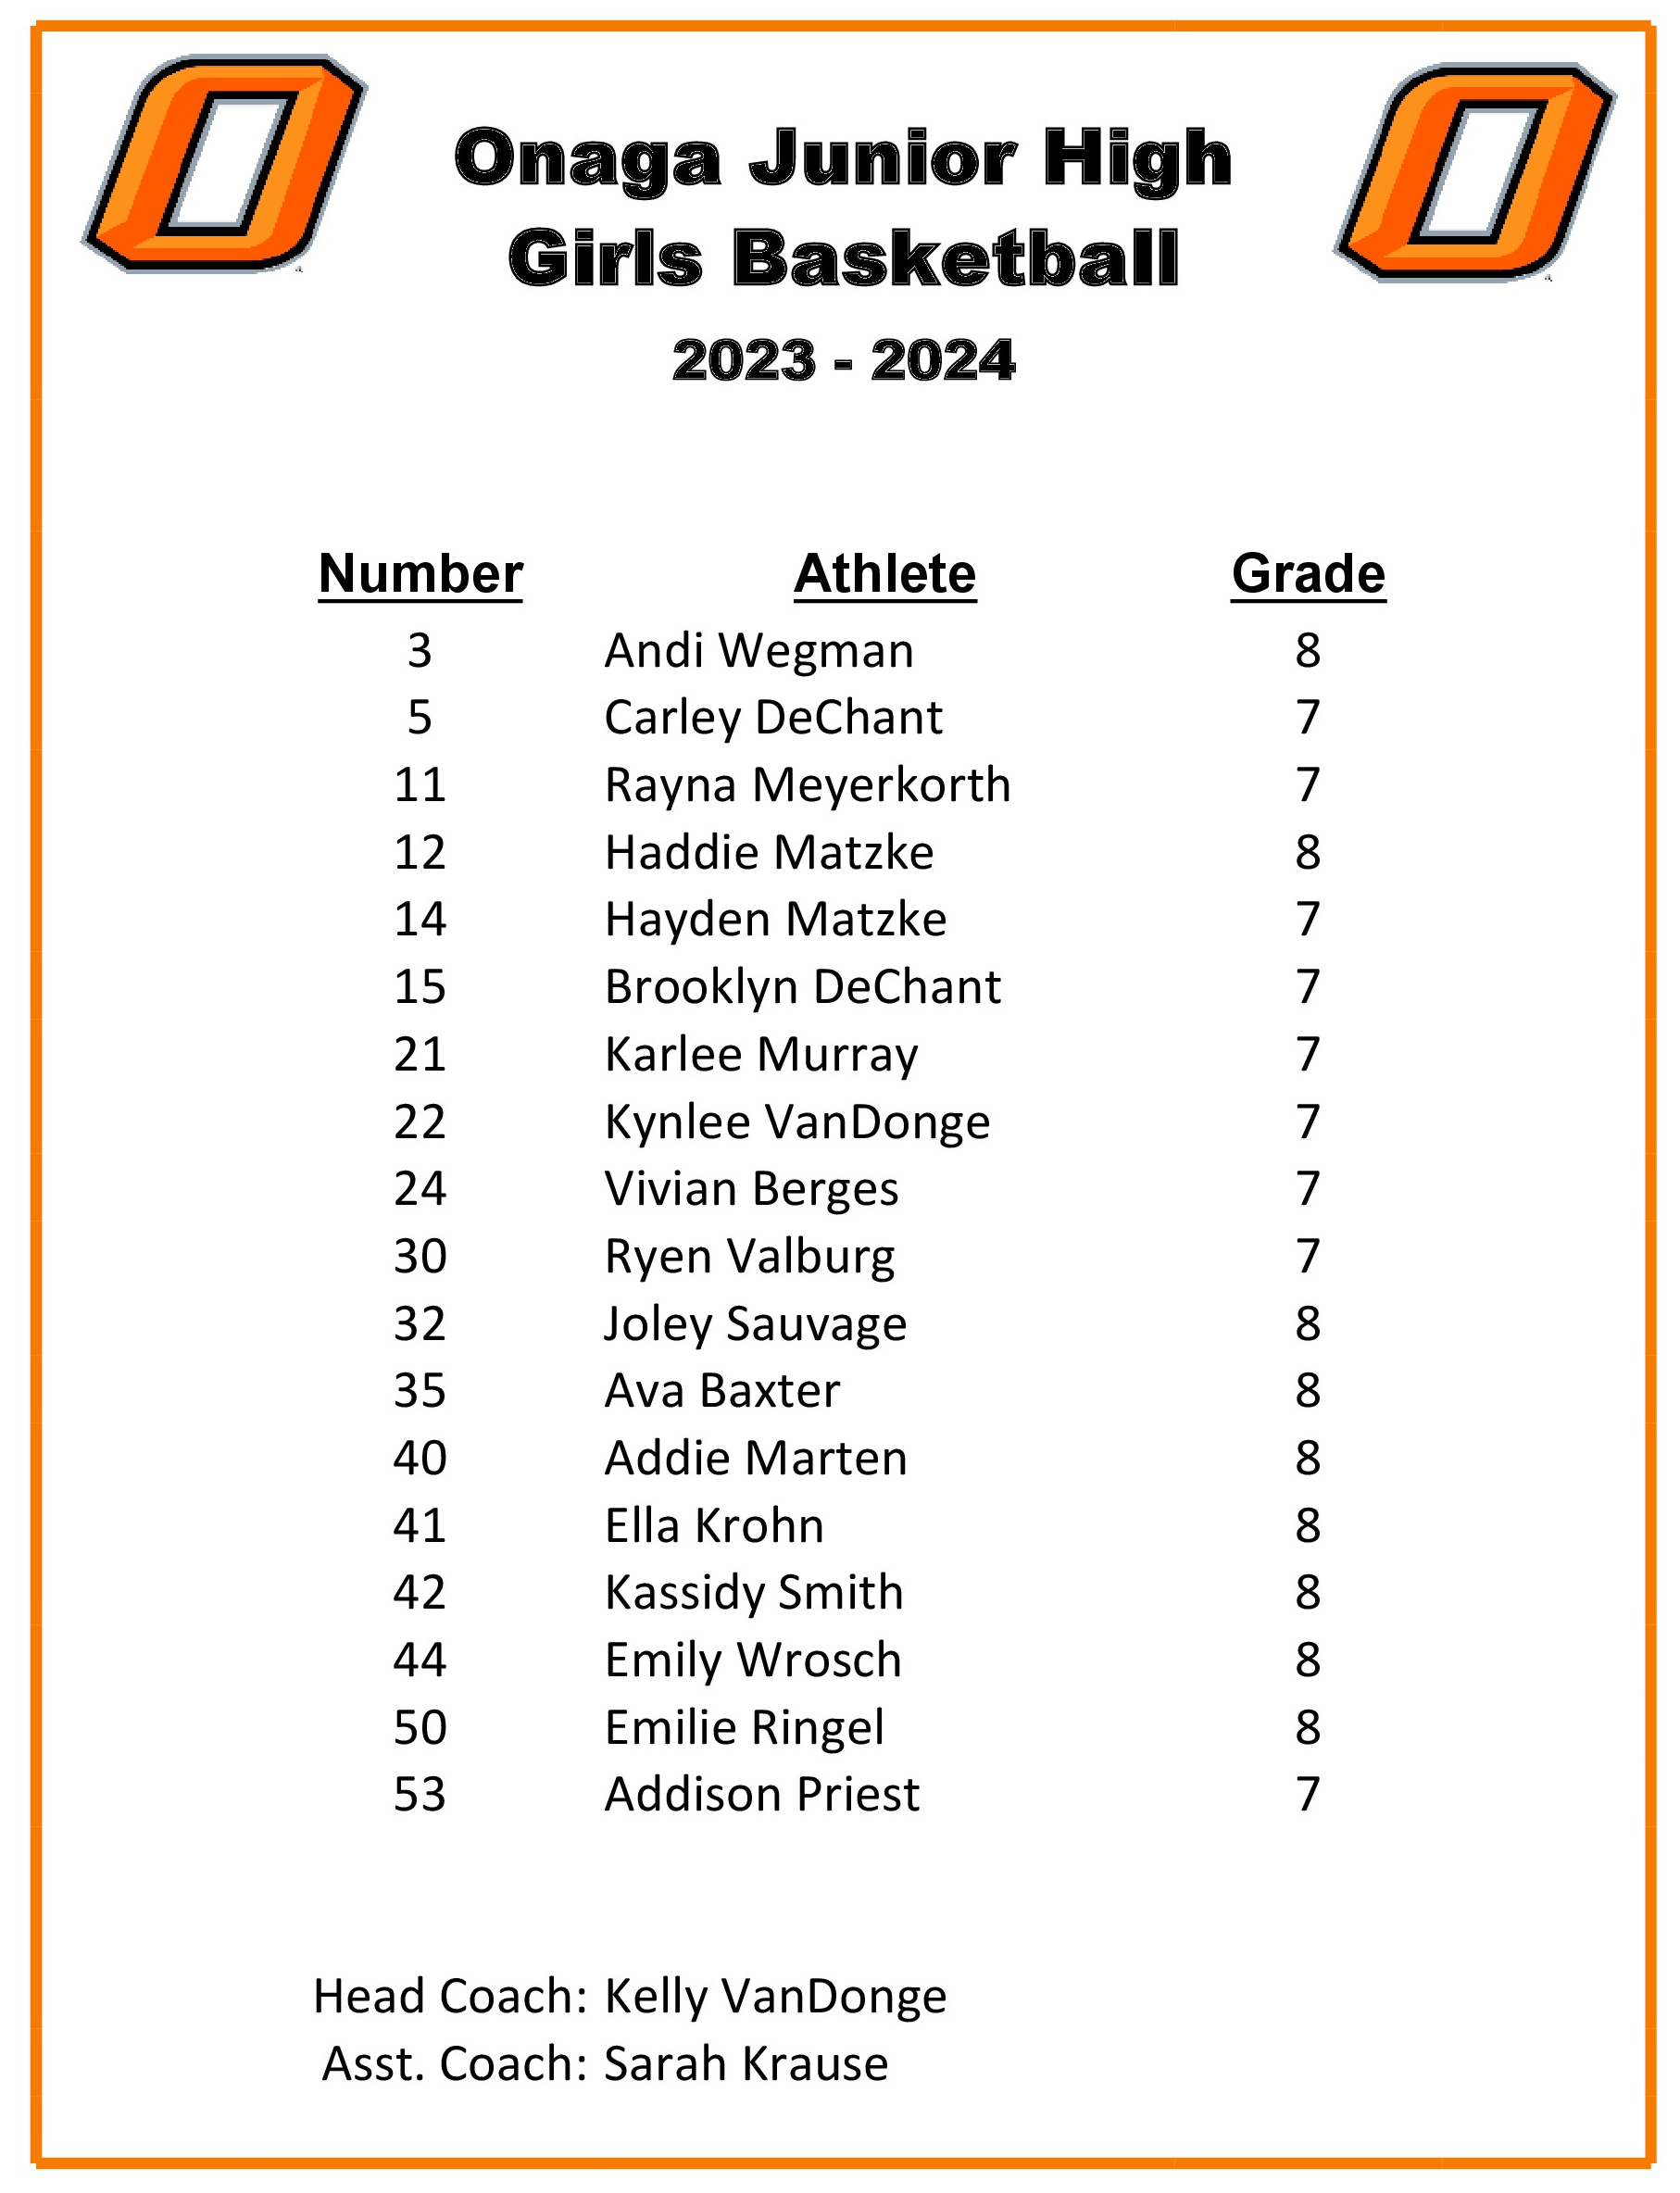 2023-2024 Roster